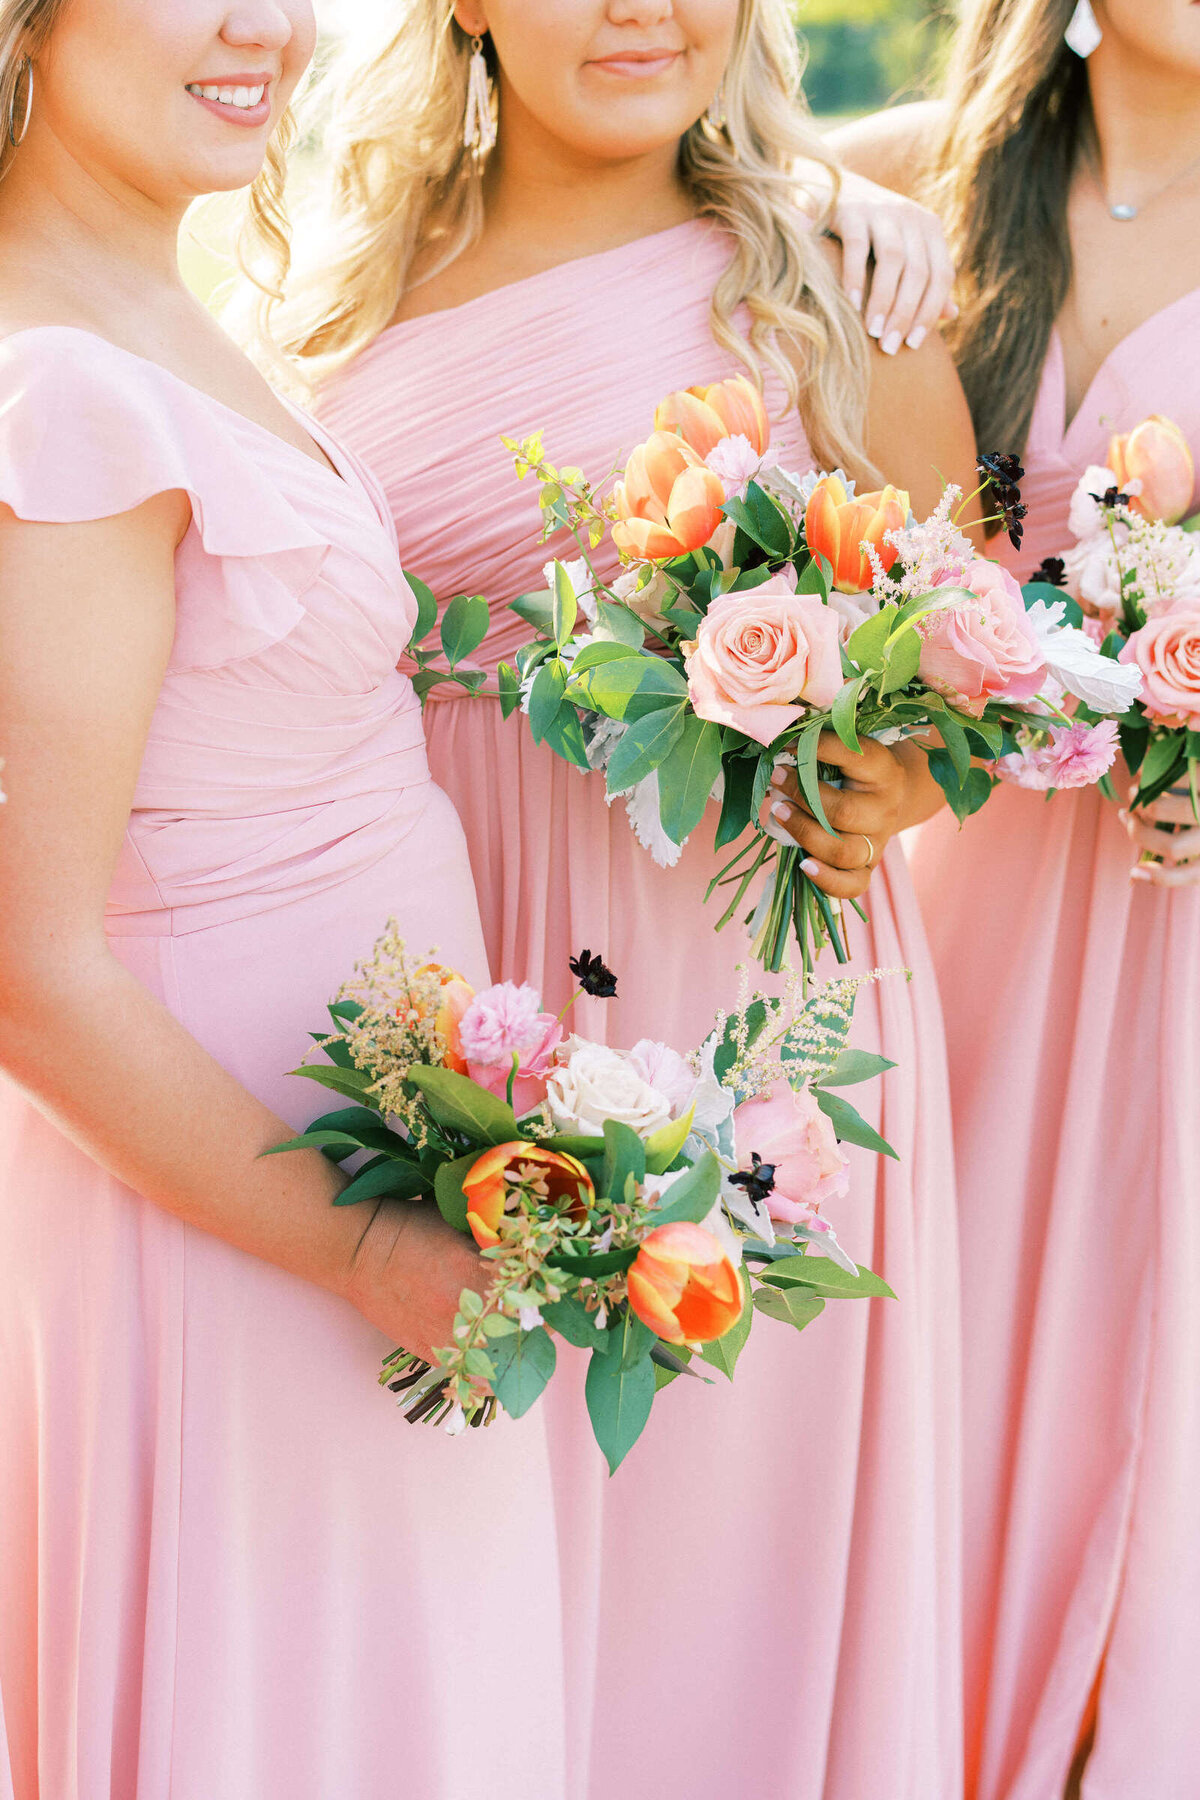 Light pink bridesmaids dresses and orange and blush bouquets